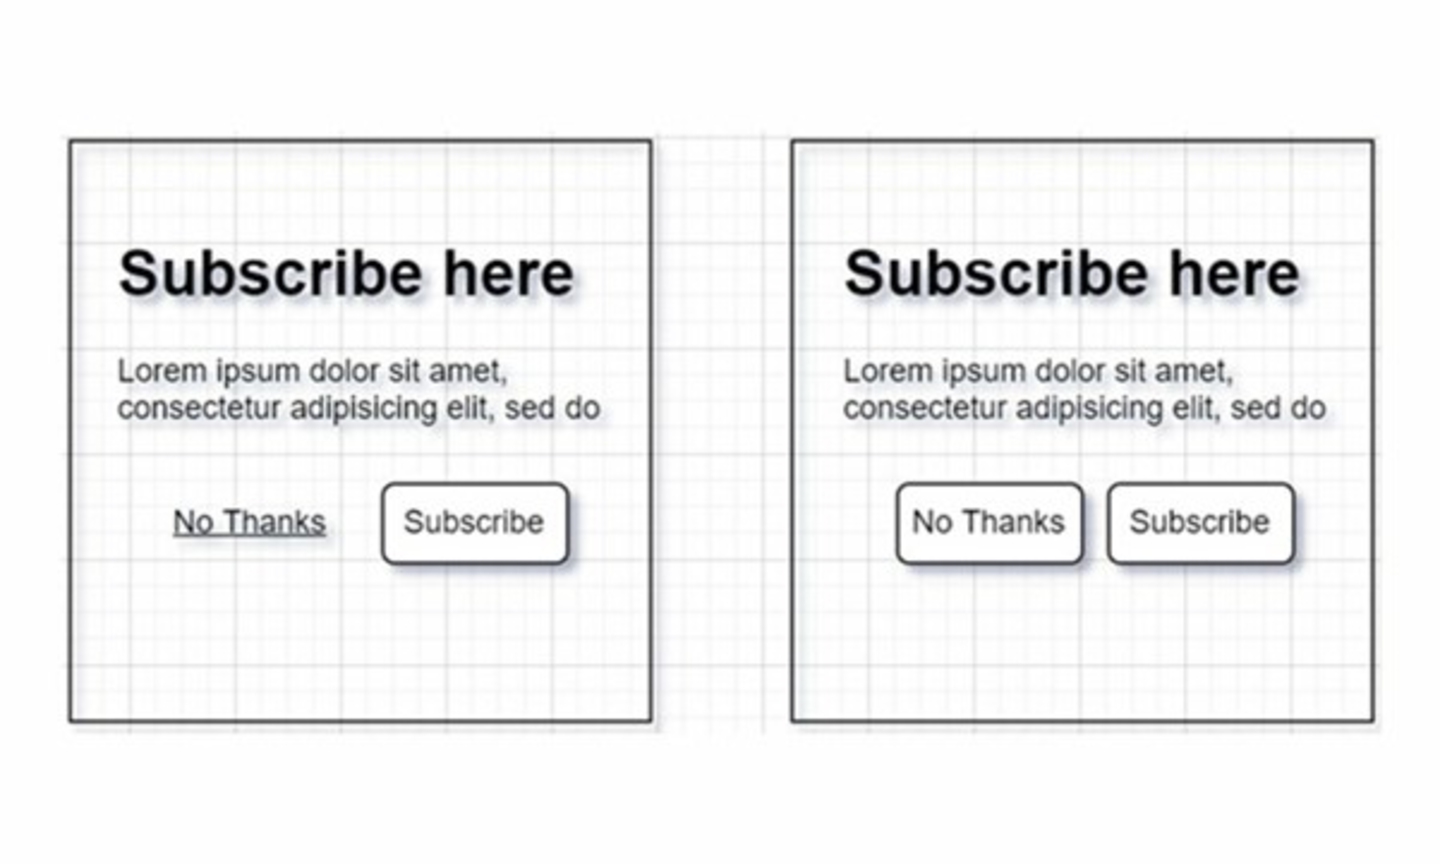 Two call to action examples - subscribe here